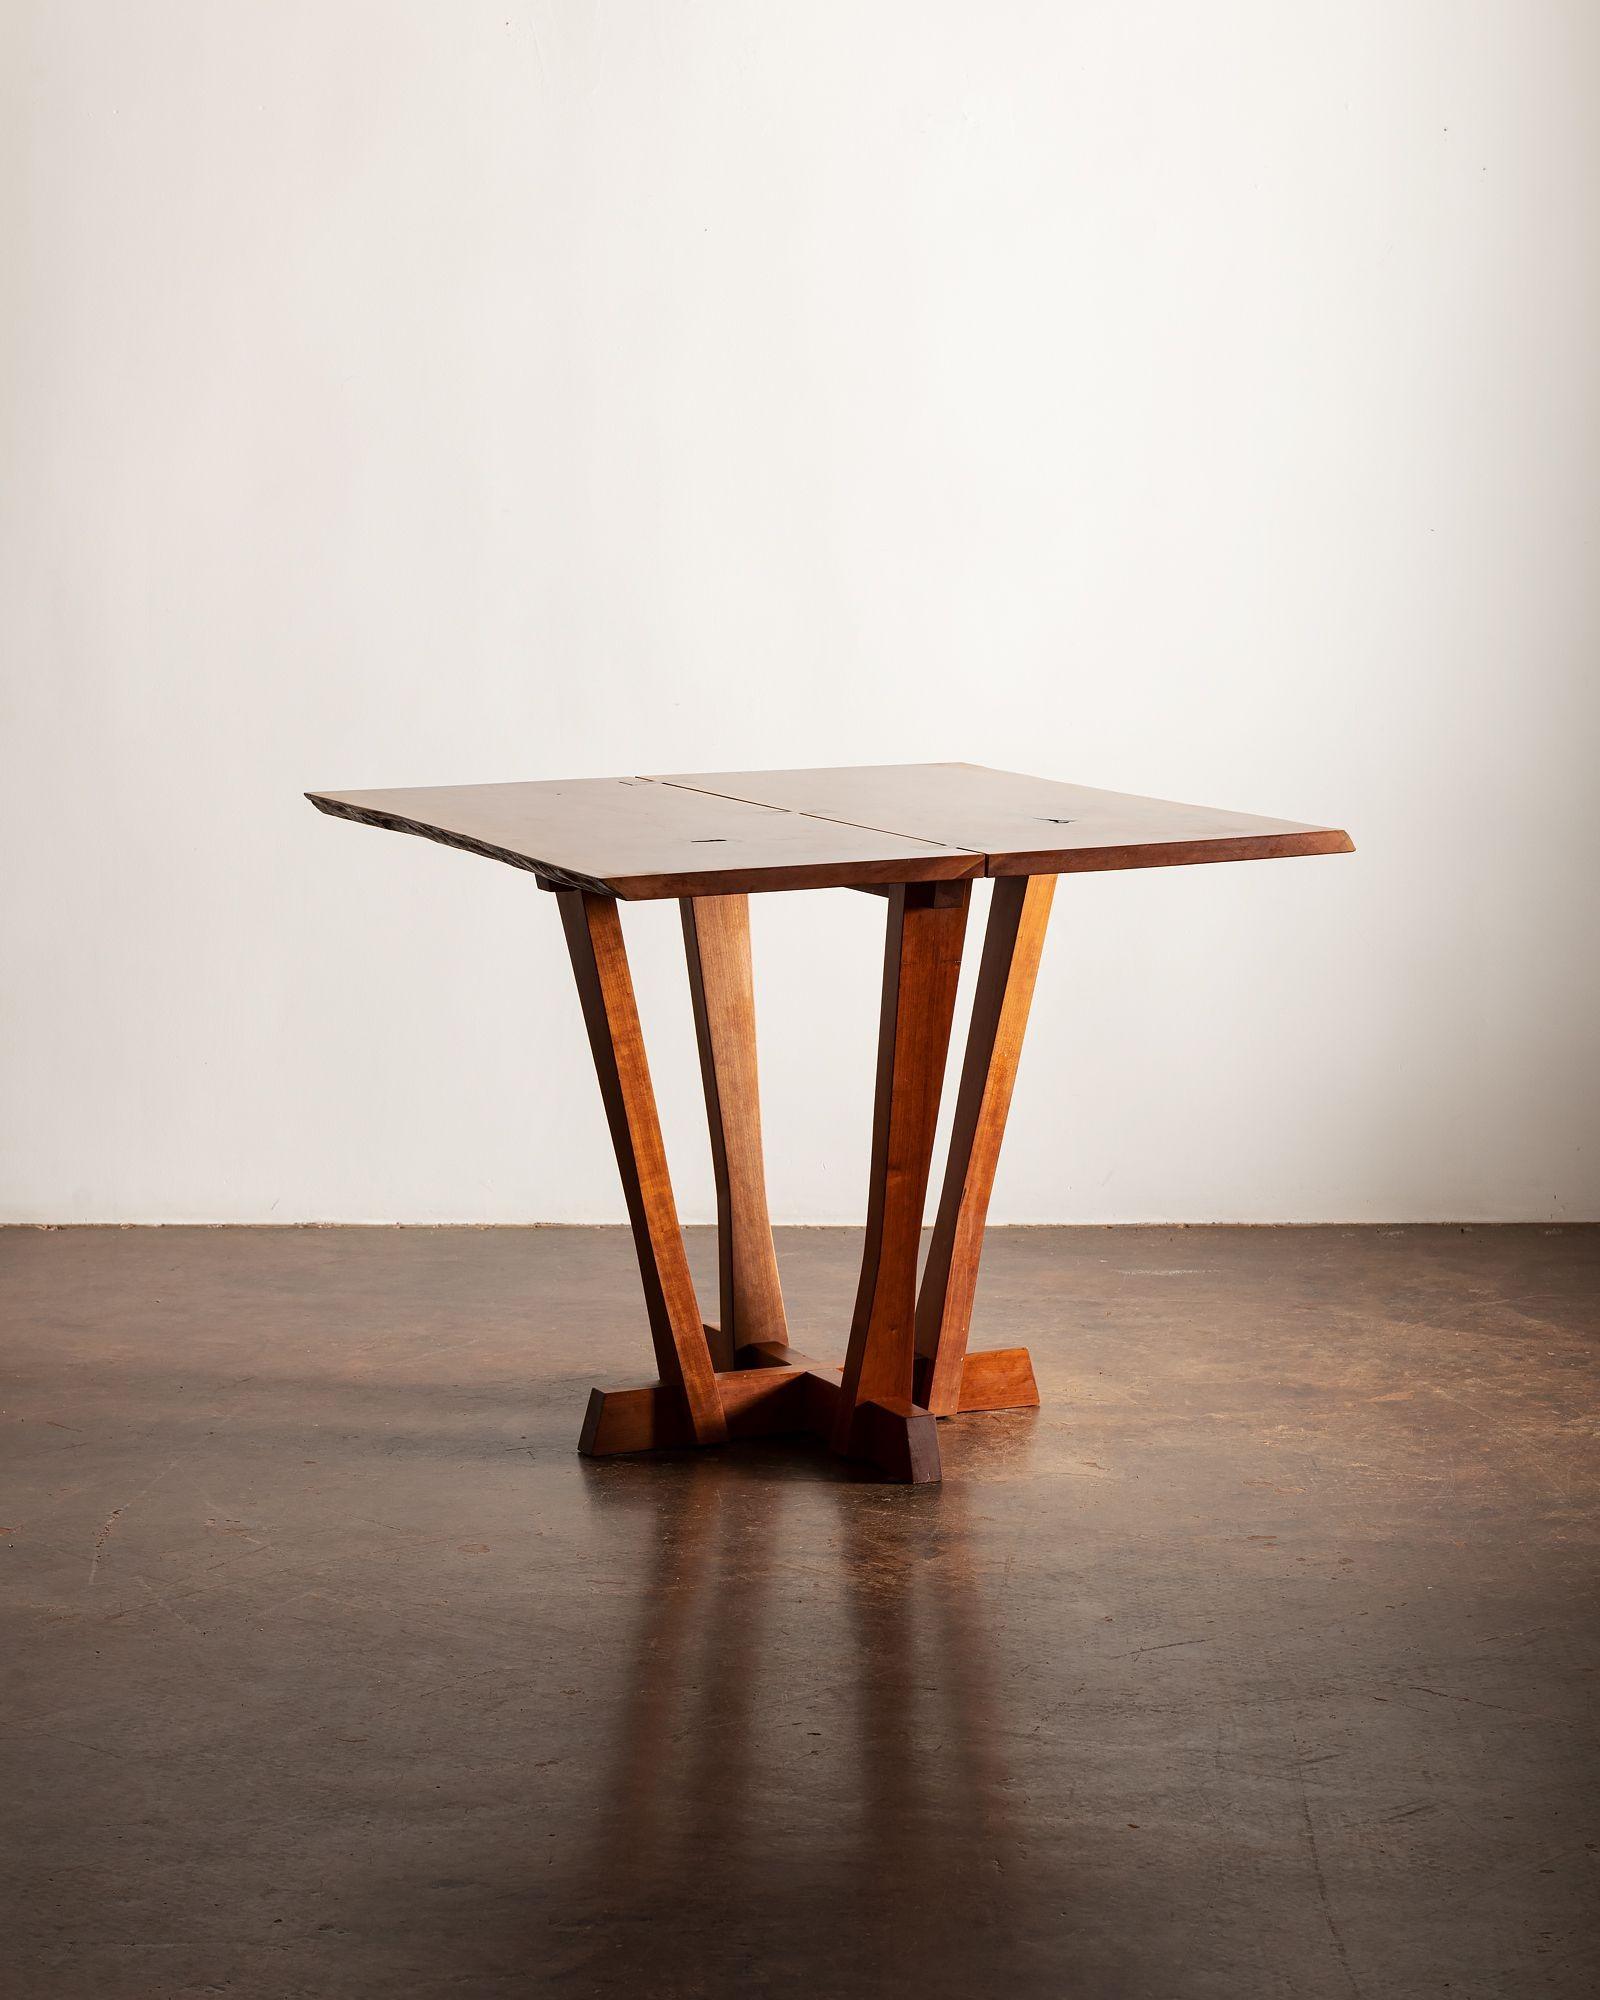 Contemporary Mira Nakashima Special Bryfogel Table in Cherry and Laurel, 2008